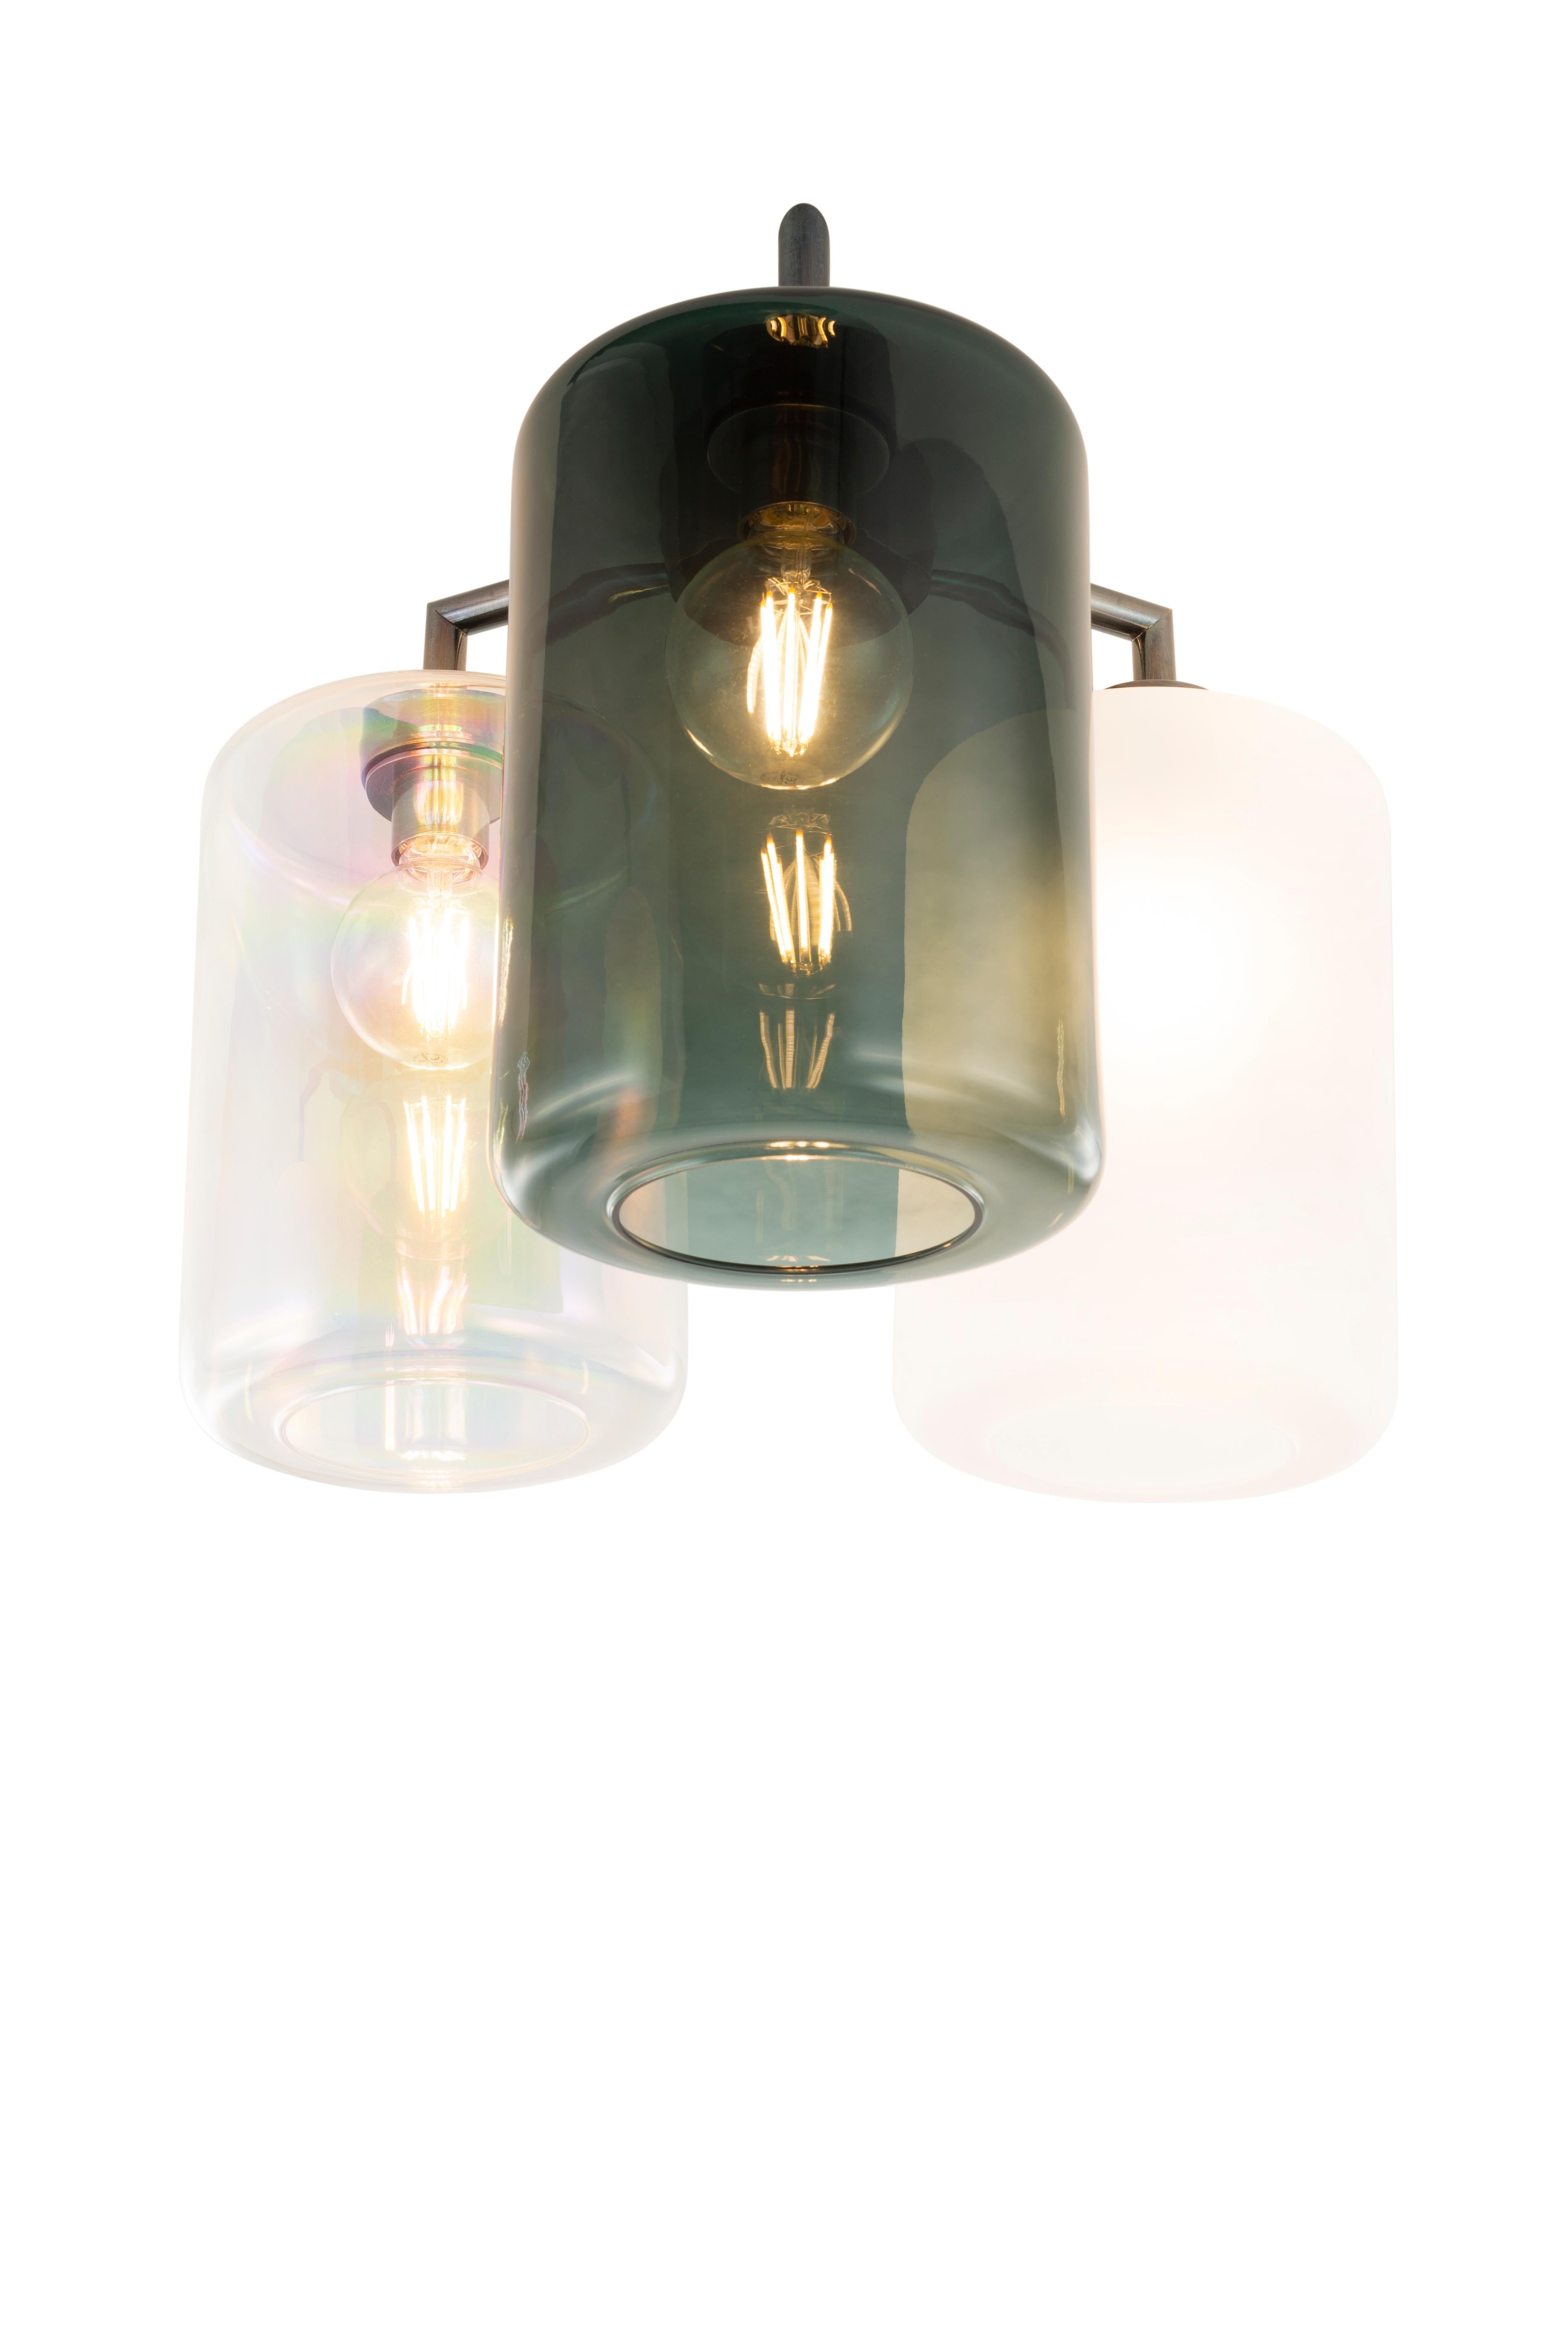 The Louise is a modern flush mount in a brass burnished finish.

With almost carefree delight, William Brand designed the Louise collection. A simple frame, decorated in a pleasing rhythm with glass lanterns. A hint of chaos, never far away in